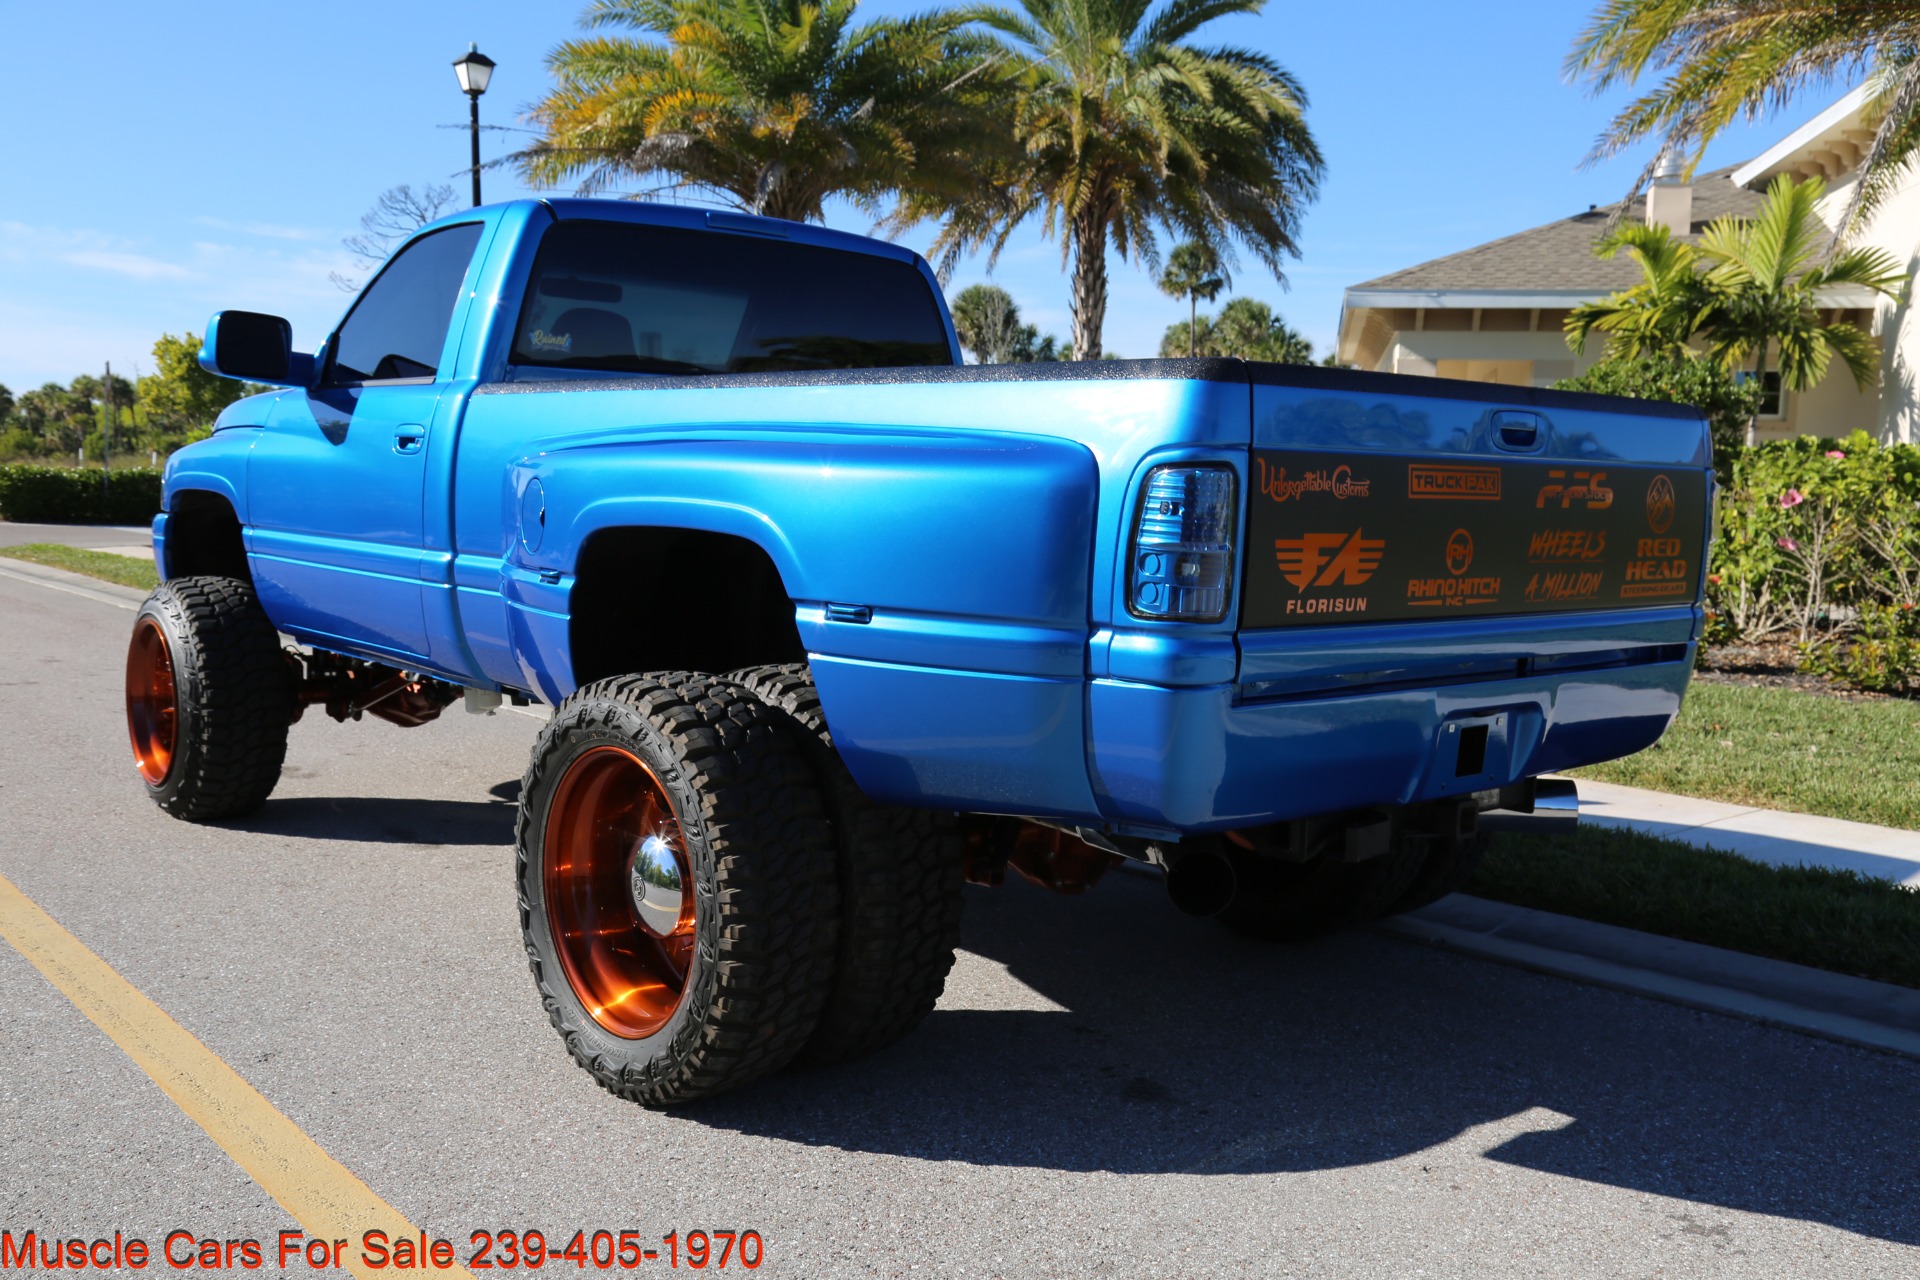 Used 2001 Dodge Ram 2500 Dually For Sale ($34,900 ...